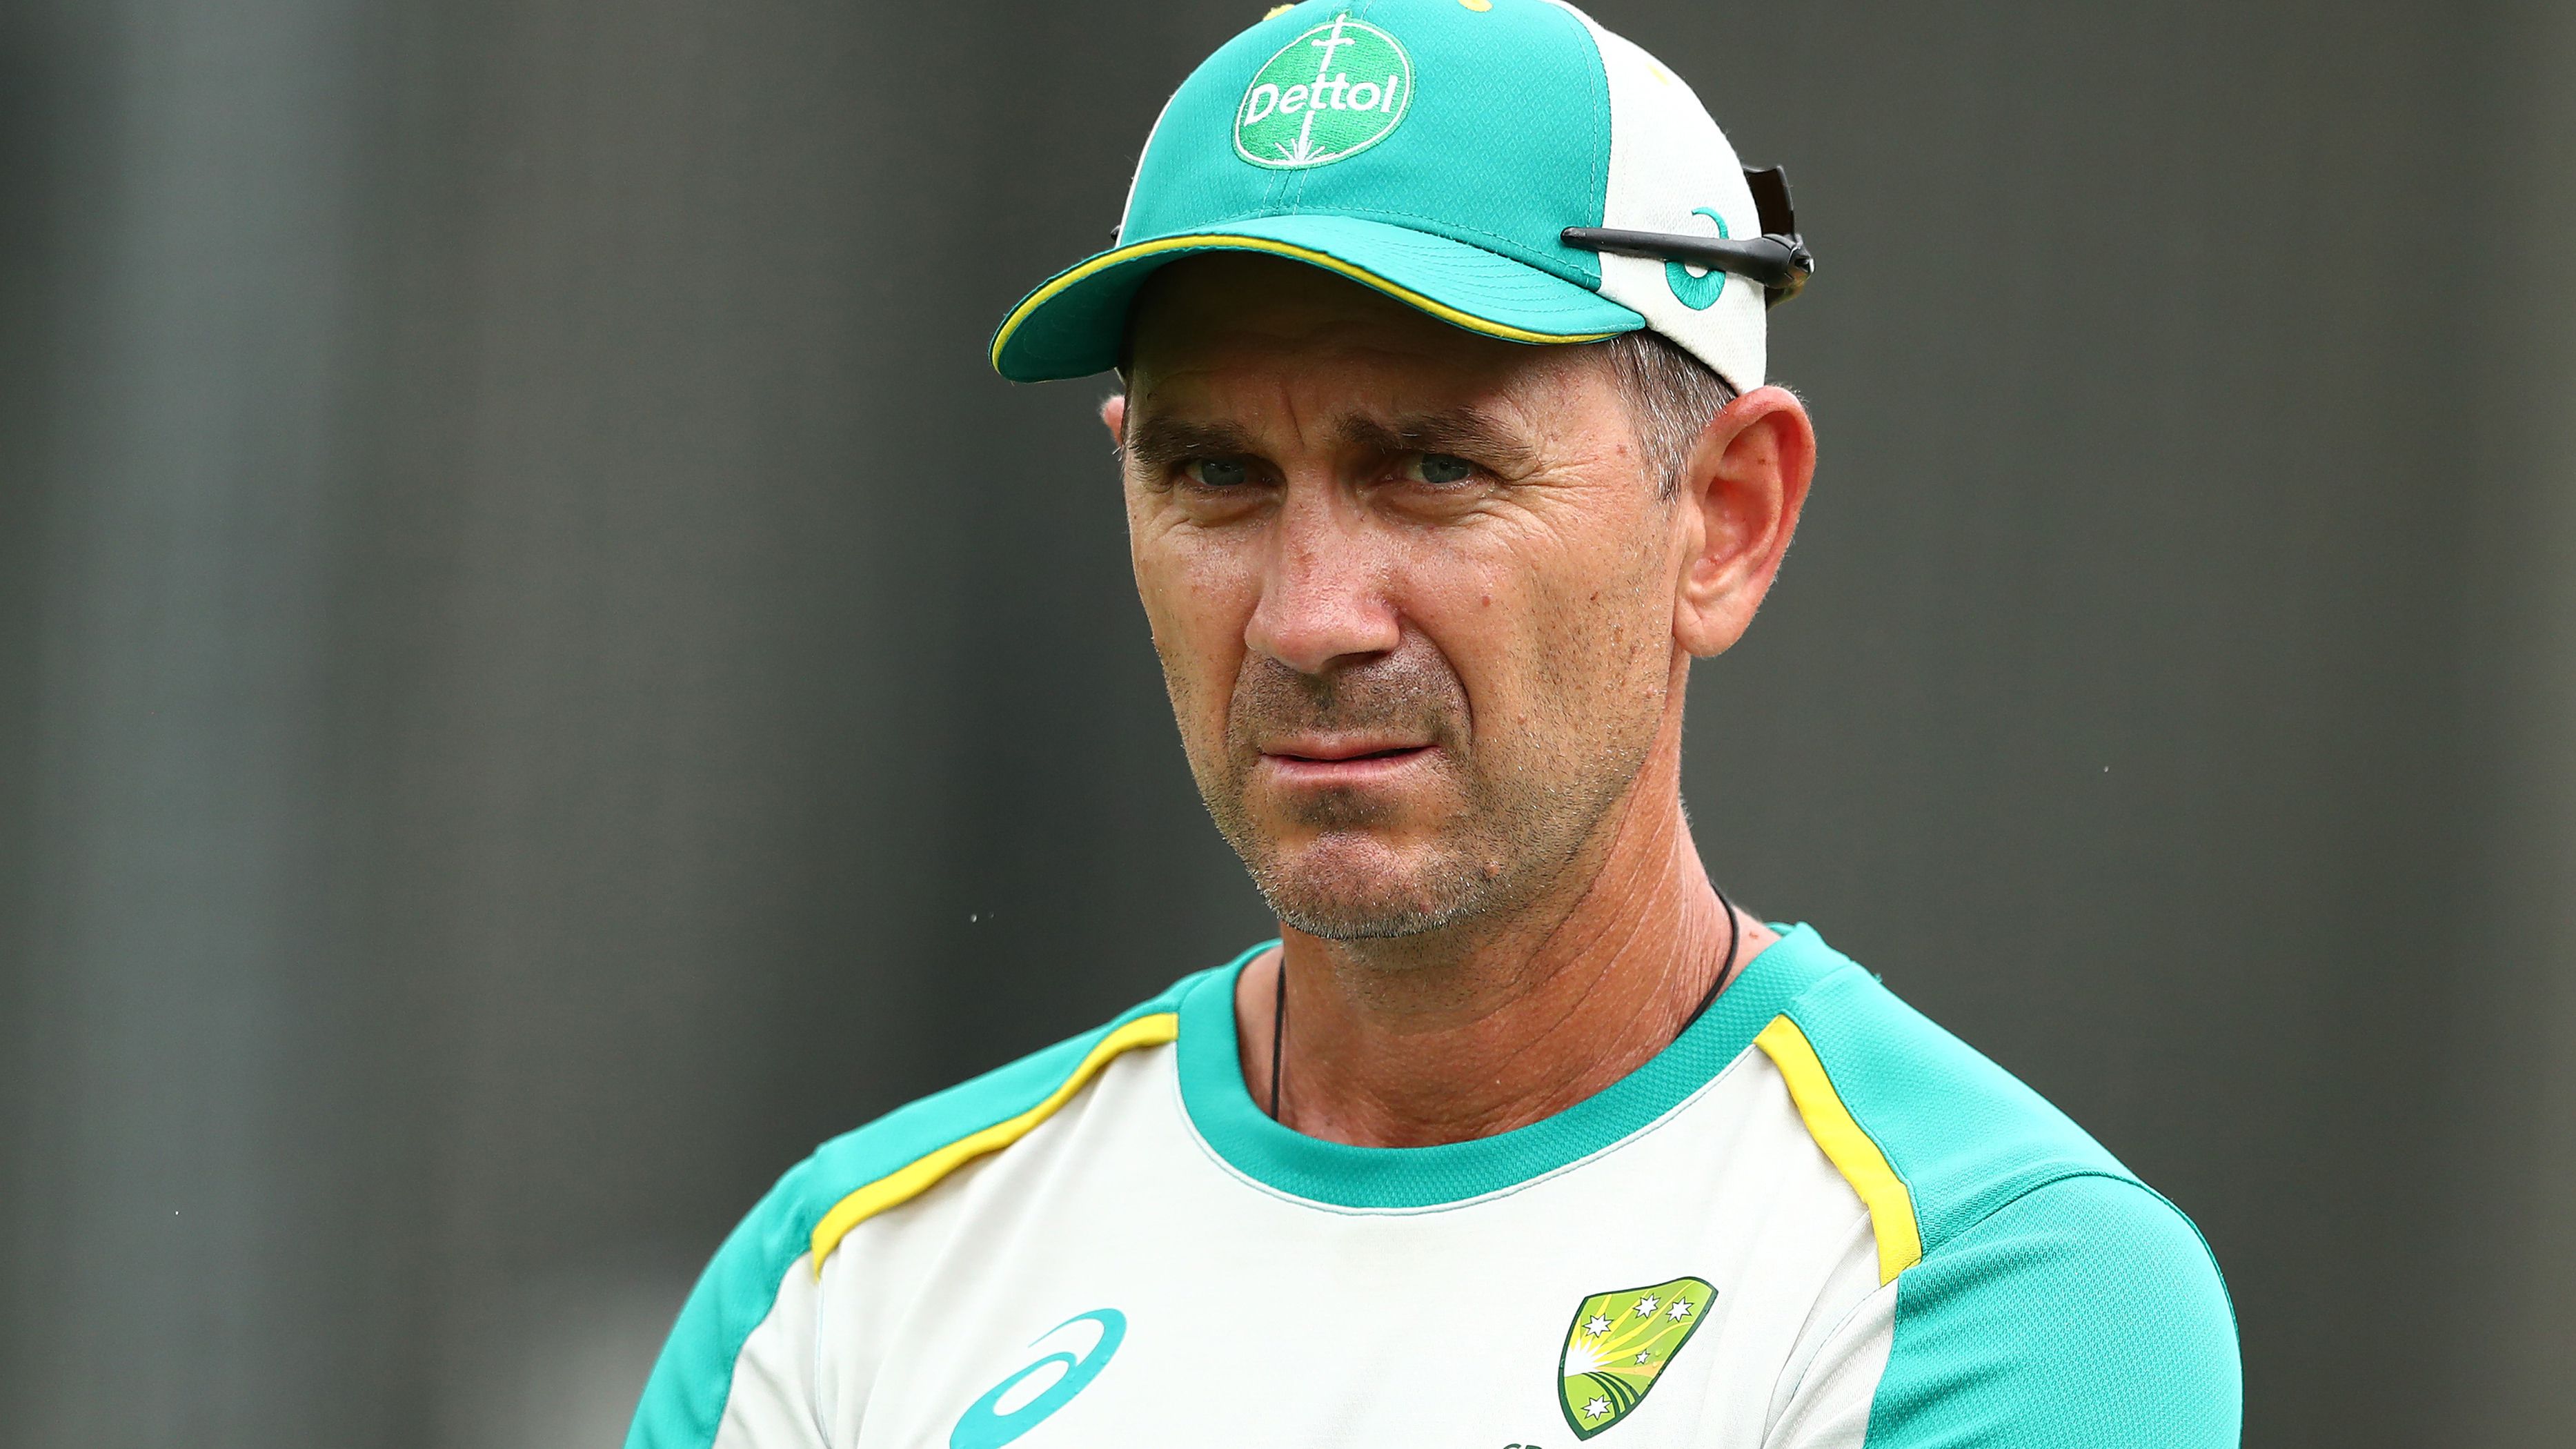 Justin Langer will pursue contract extension with Cricket Australia to see him remain Australian coach